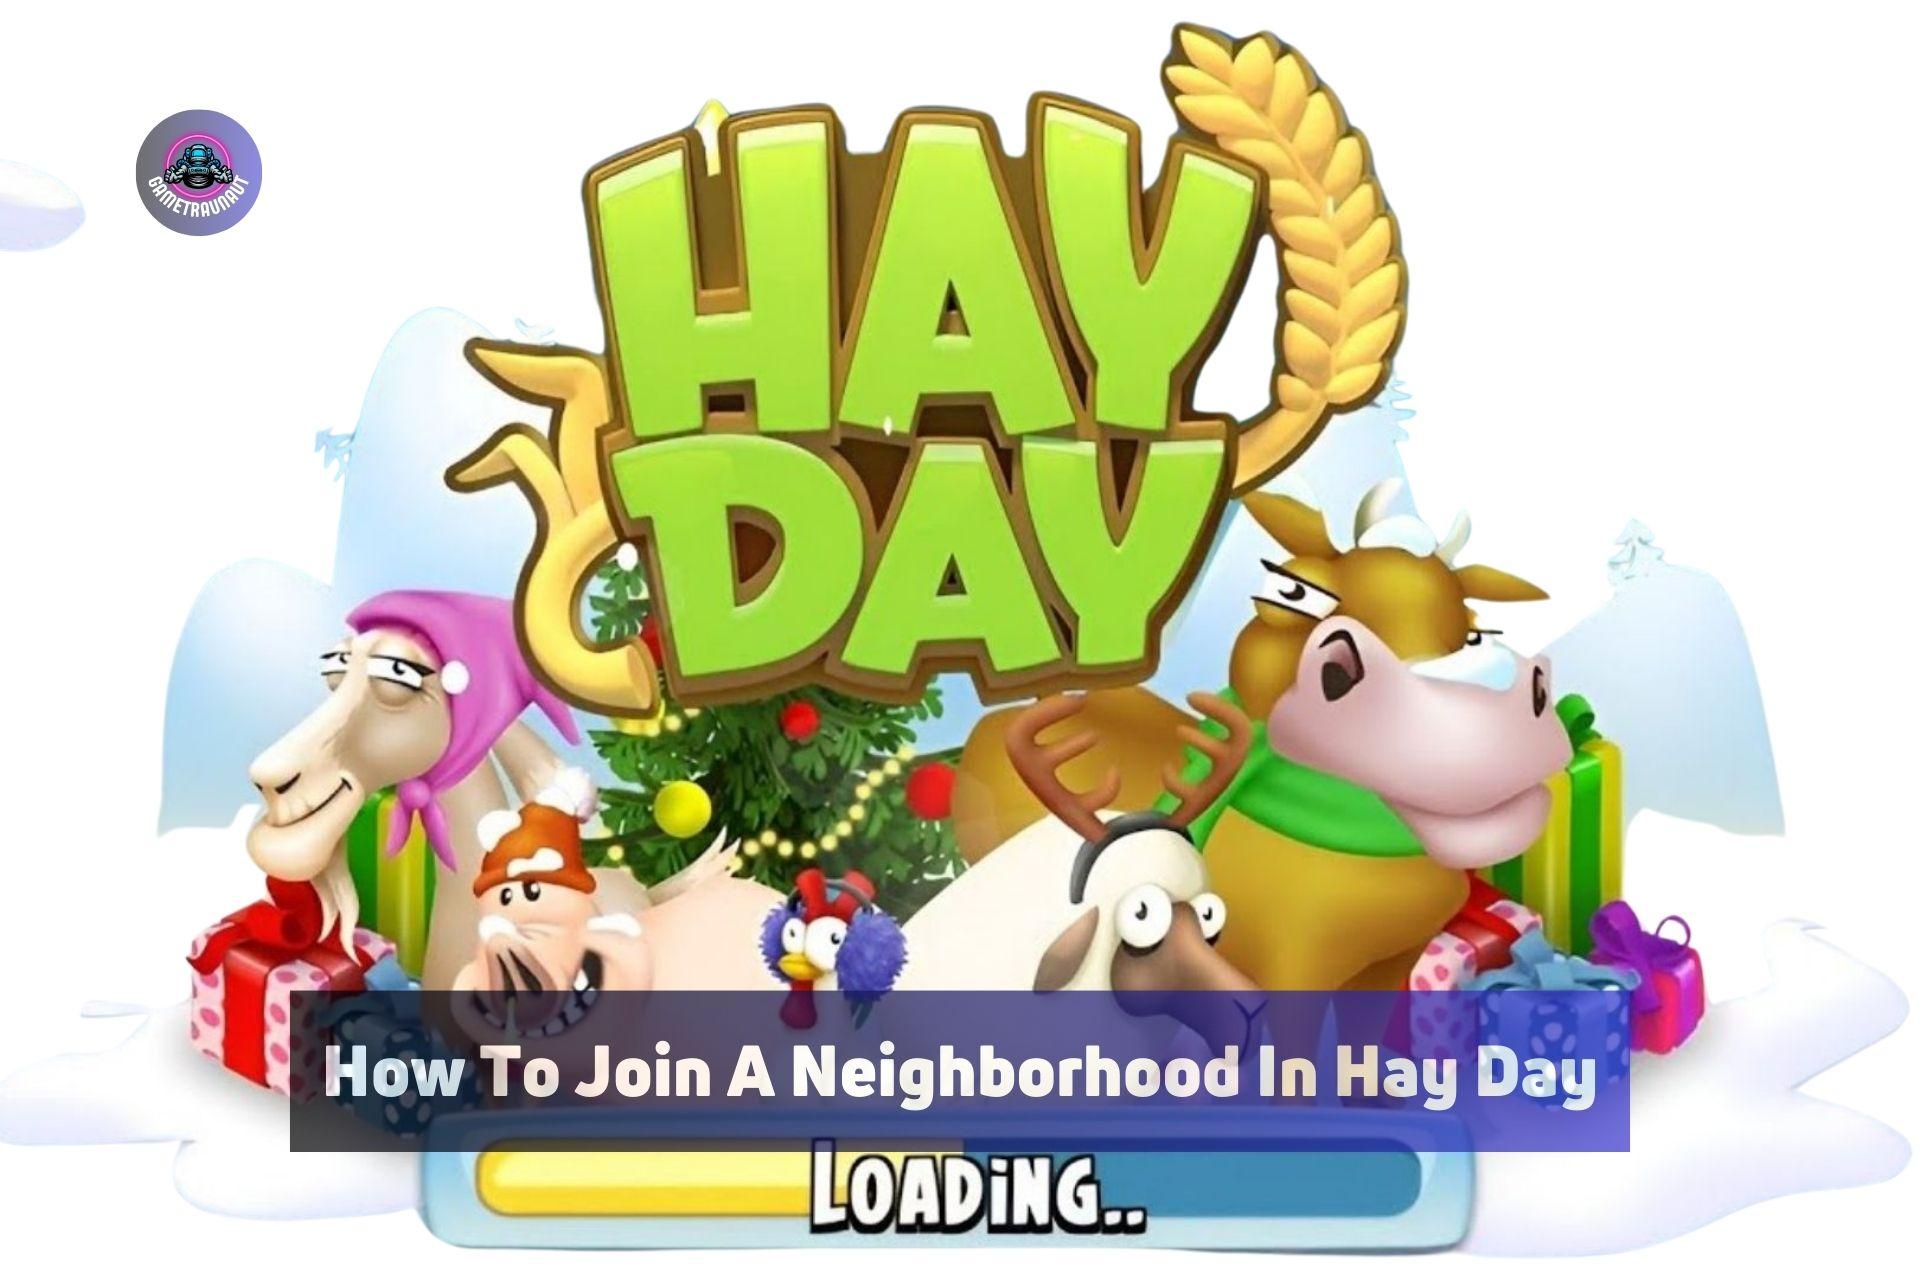 How to join a neighborhood on hay day